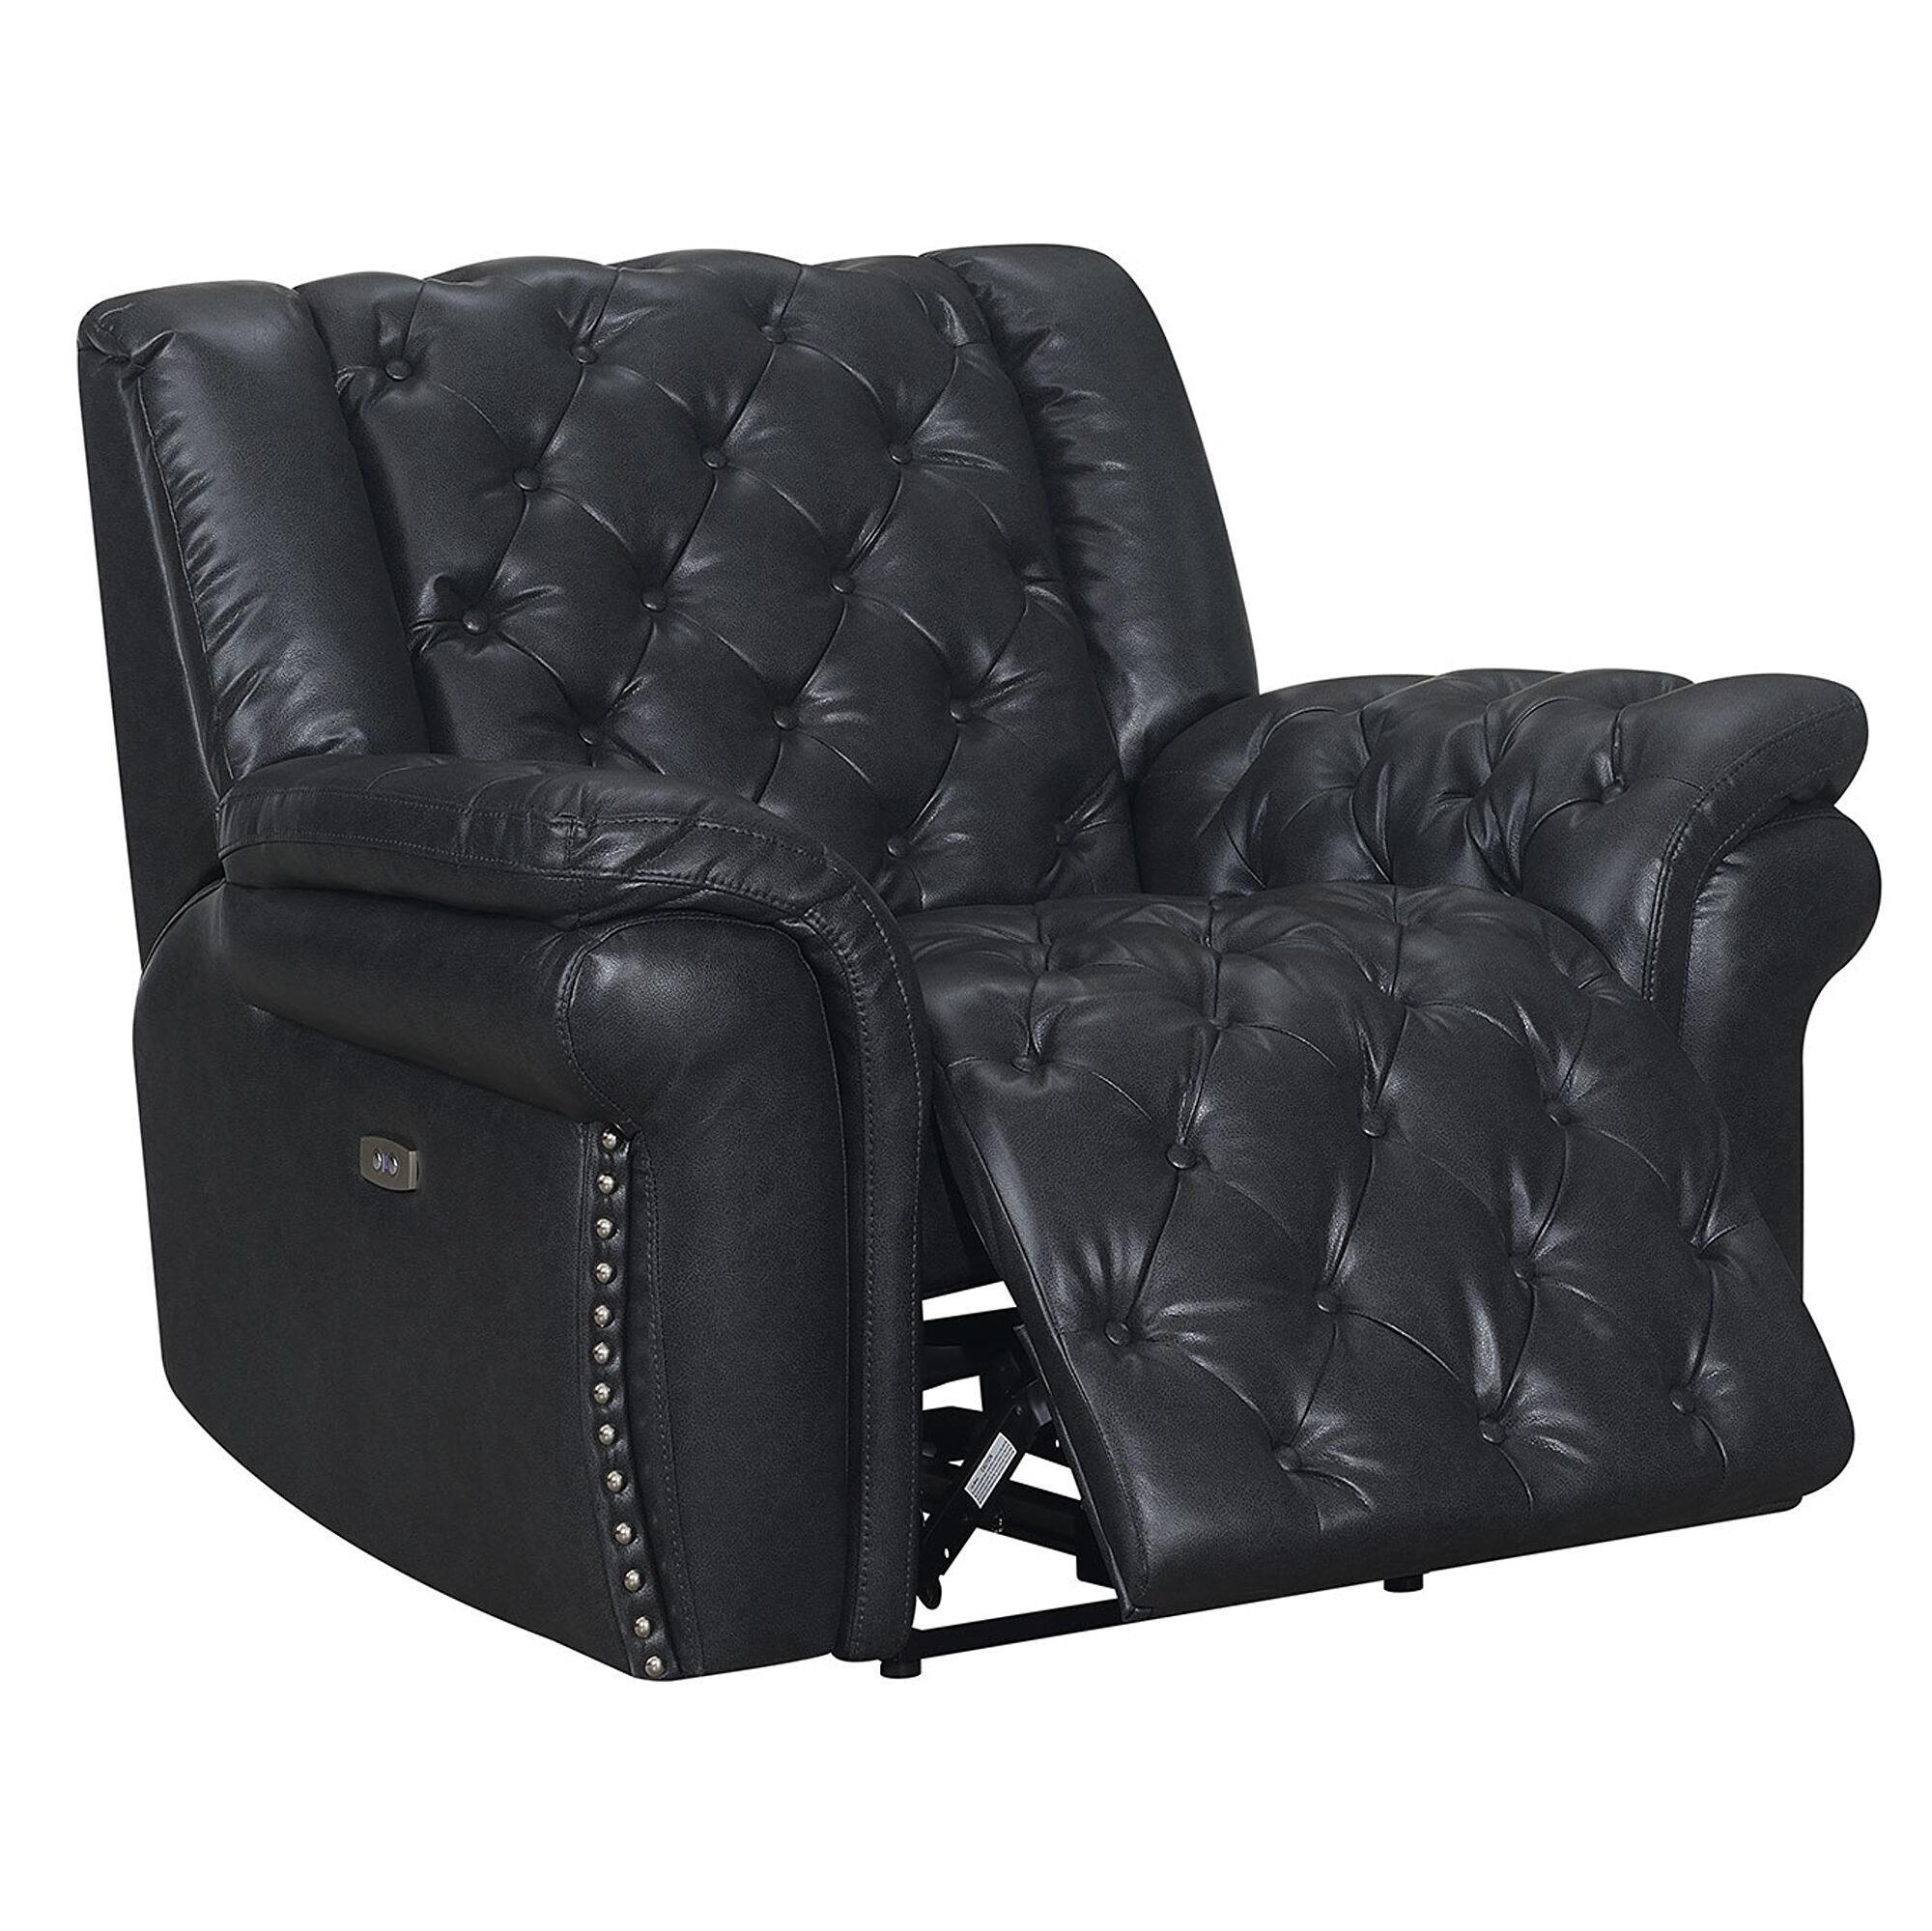 Transitional Power recliner EVELYN BLANCHE CHARCOAL EVELYN-DTP932-7-PR in Charcoal Leather Air/Match